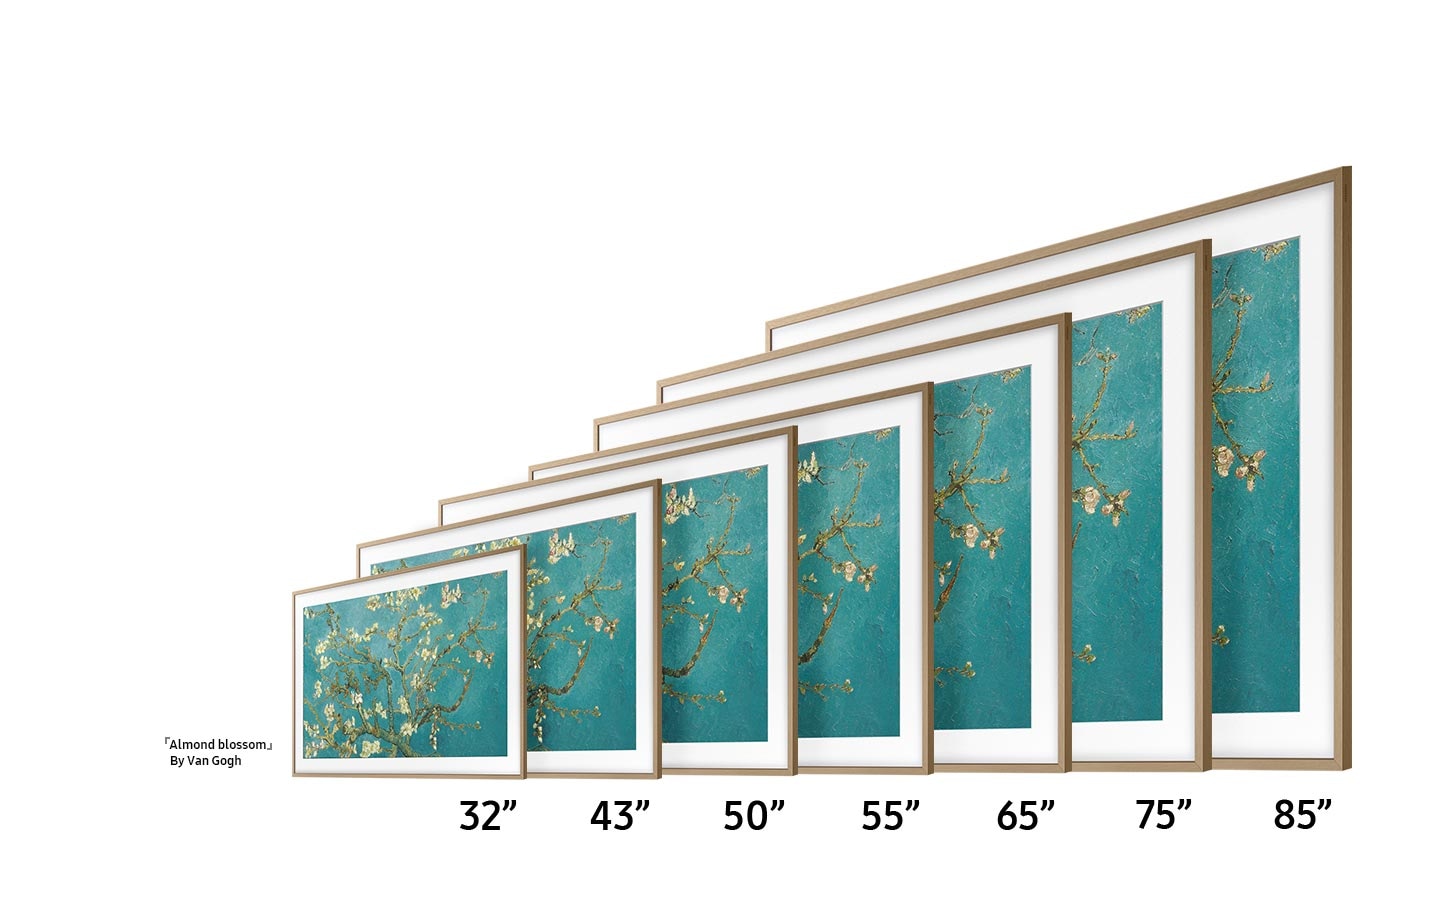 Modern and Beveled Bezels are compatible with 32, 43, 50, 55, 65, 75, and 85-inch TVs. 'Almond blossom' by Van Gogh on screens increasing in size.